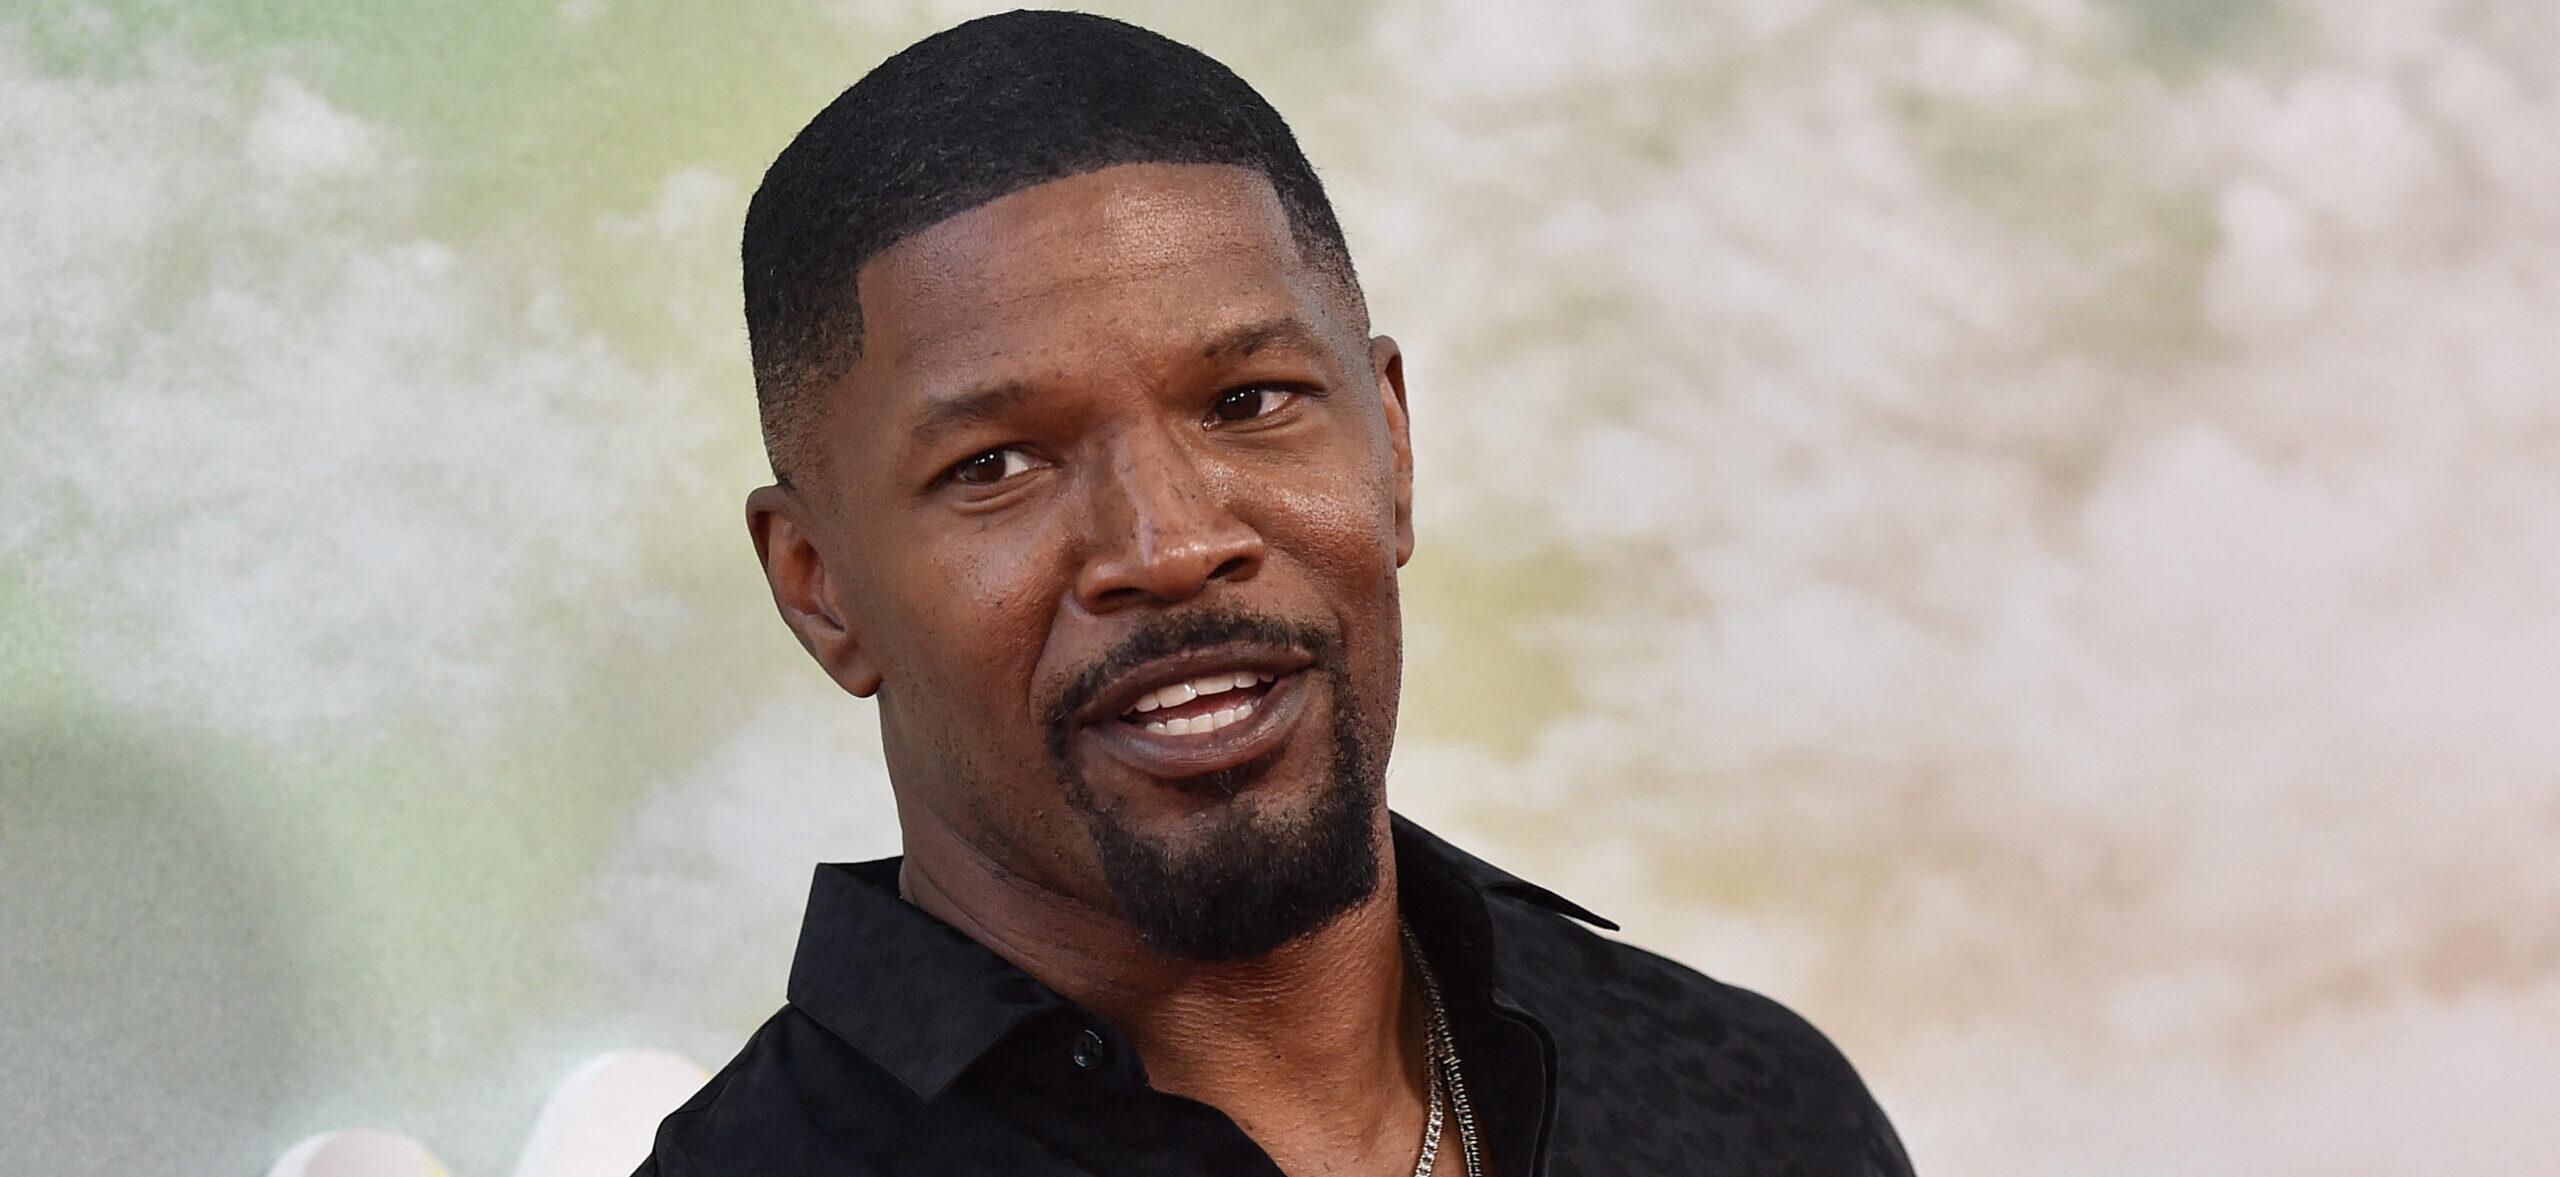 Jamie Foxx Apologizes After Being Accused Of ‘Antisemitism’ Over THIS Post About Jesus